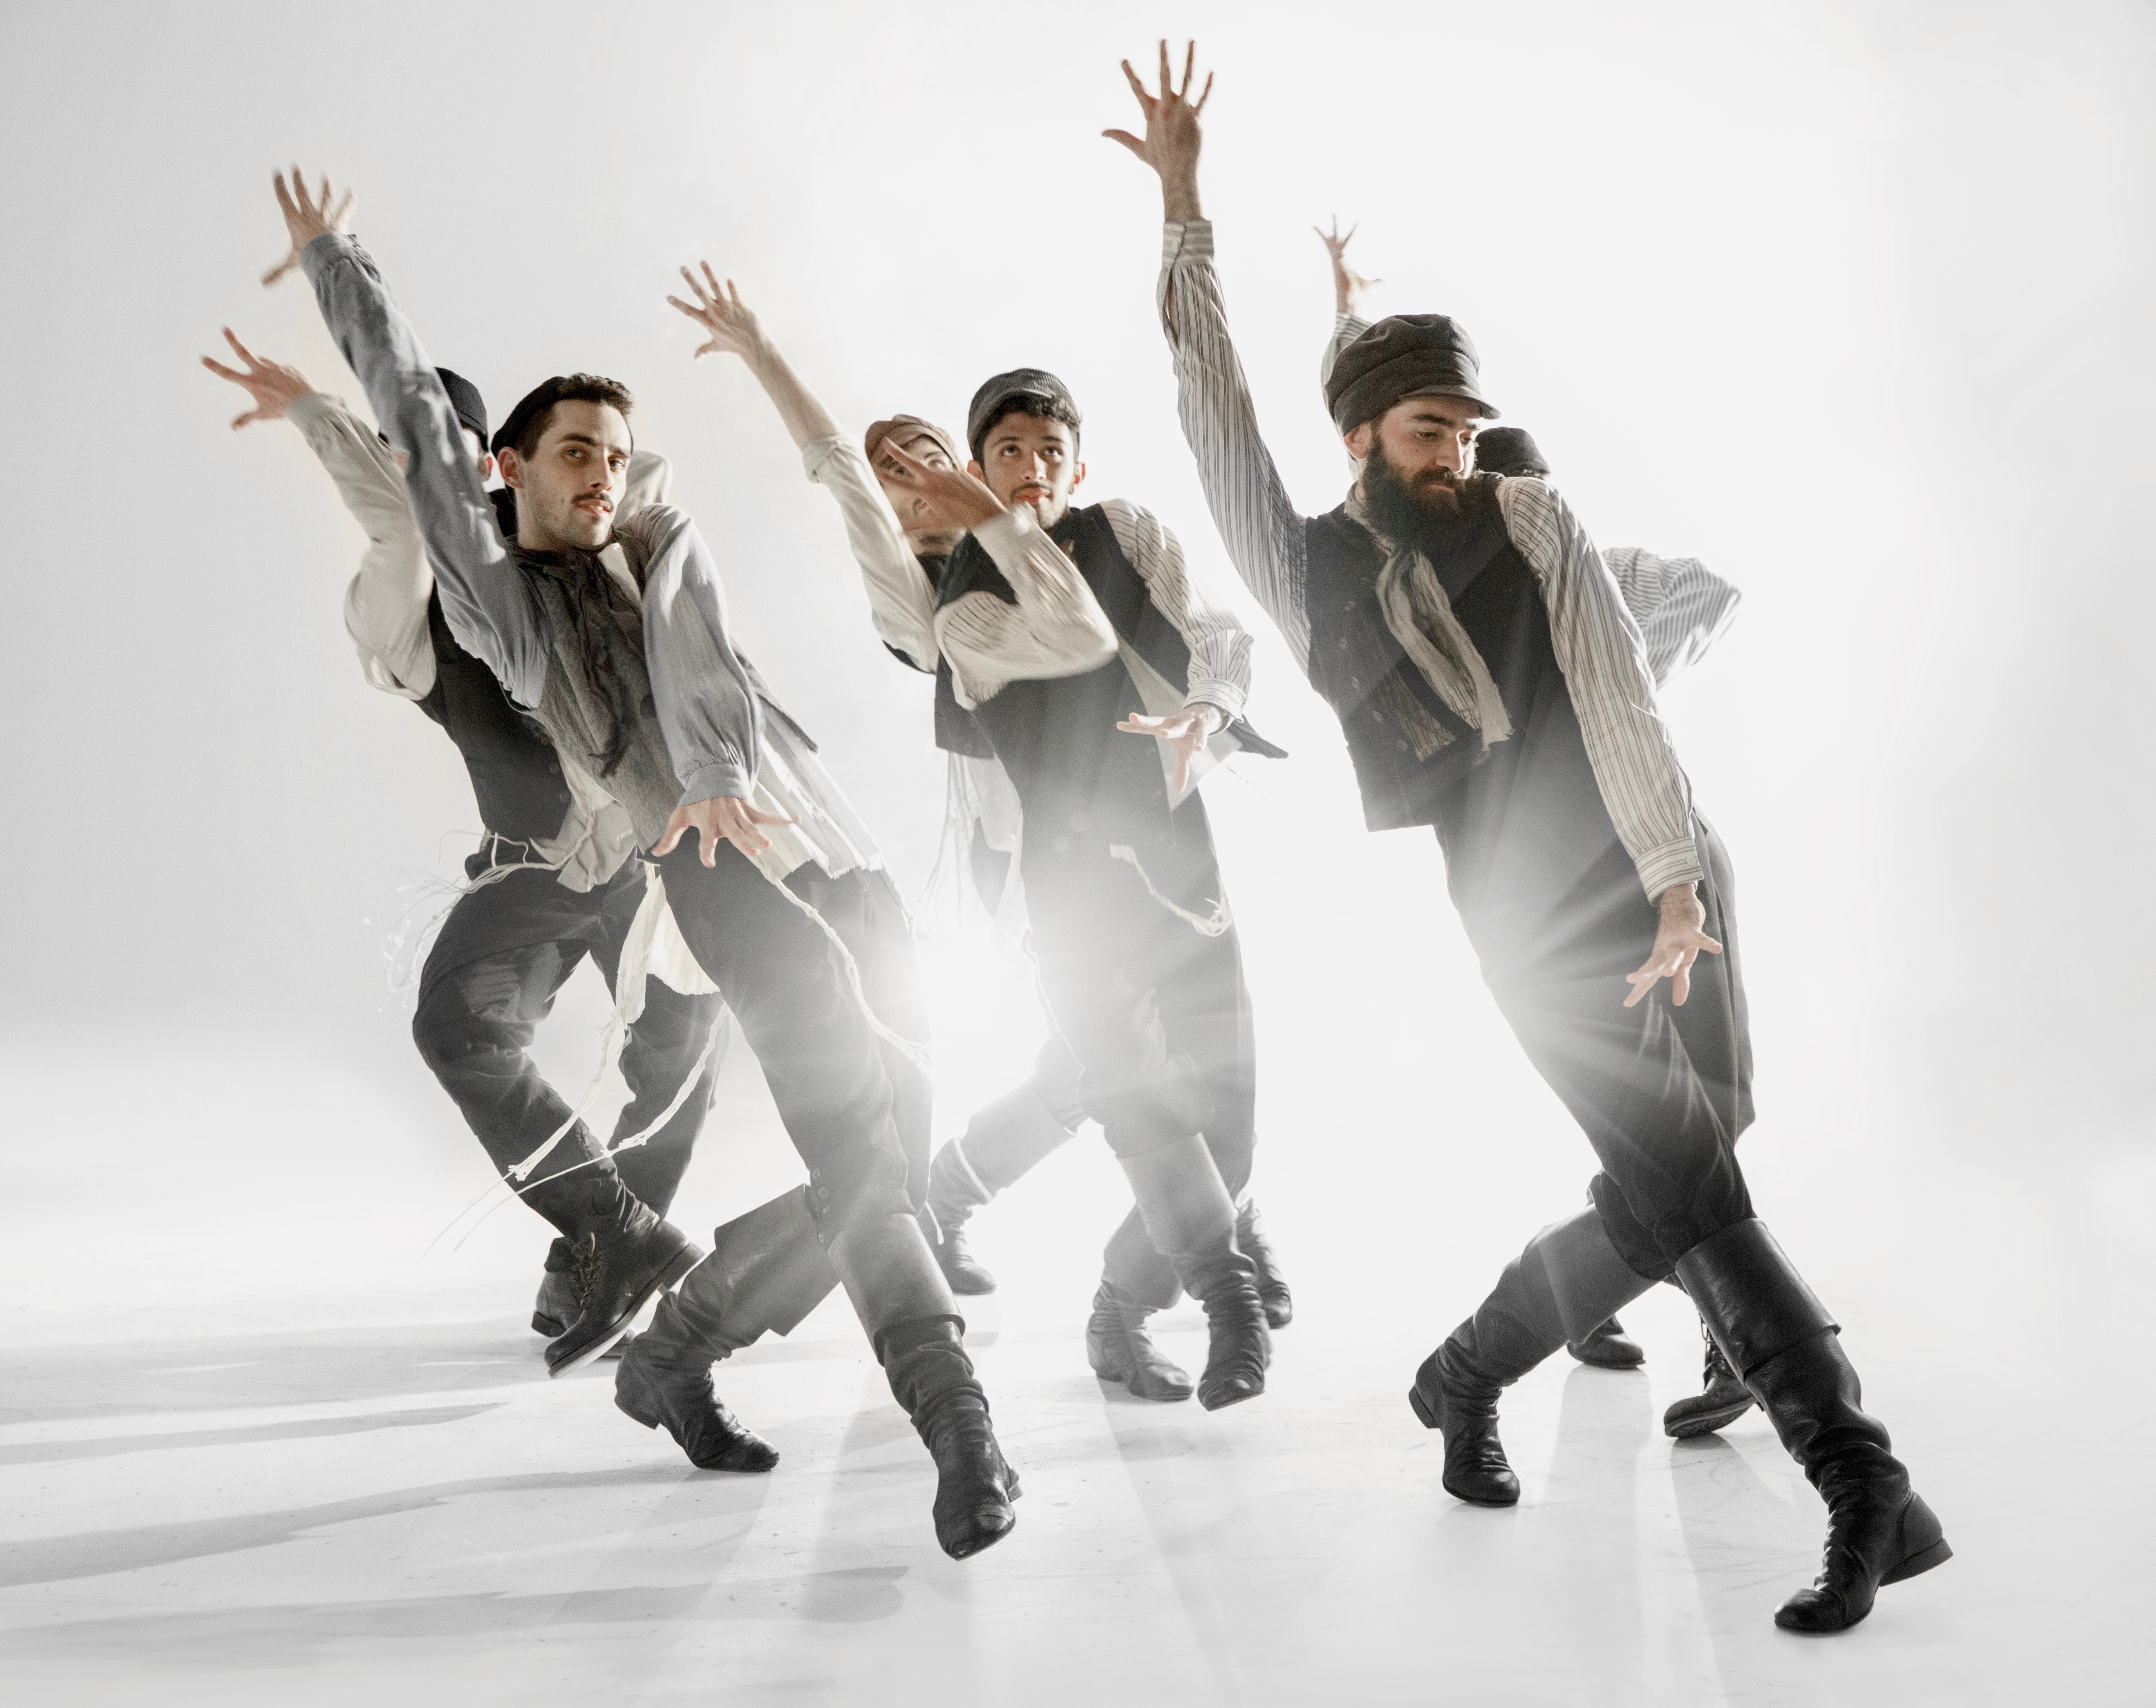 The boys of Anatevka are bringing some new moves to Pittsburgh. That's because the touring production of 'Fiddler on the Roof' has choreography by modern Israeli dance artist Hofesh Shechter. (photo: Joan Marcus)